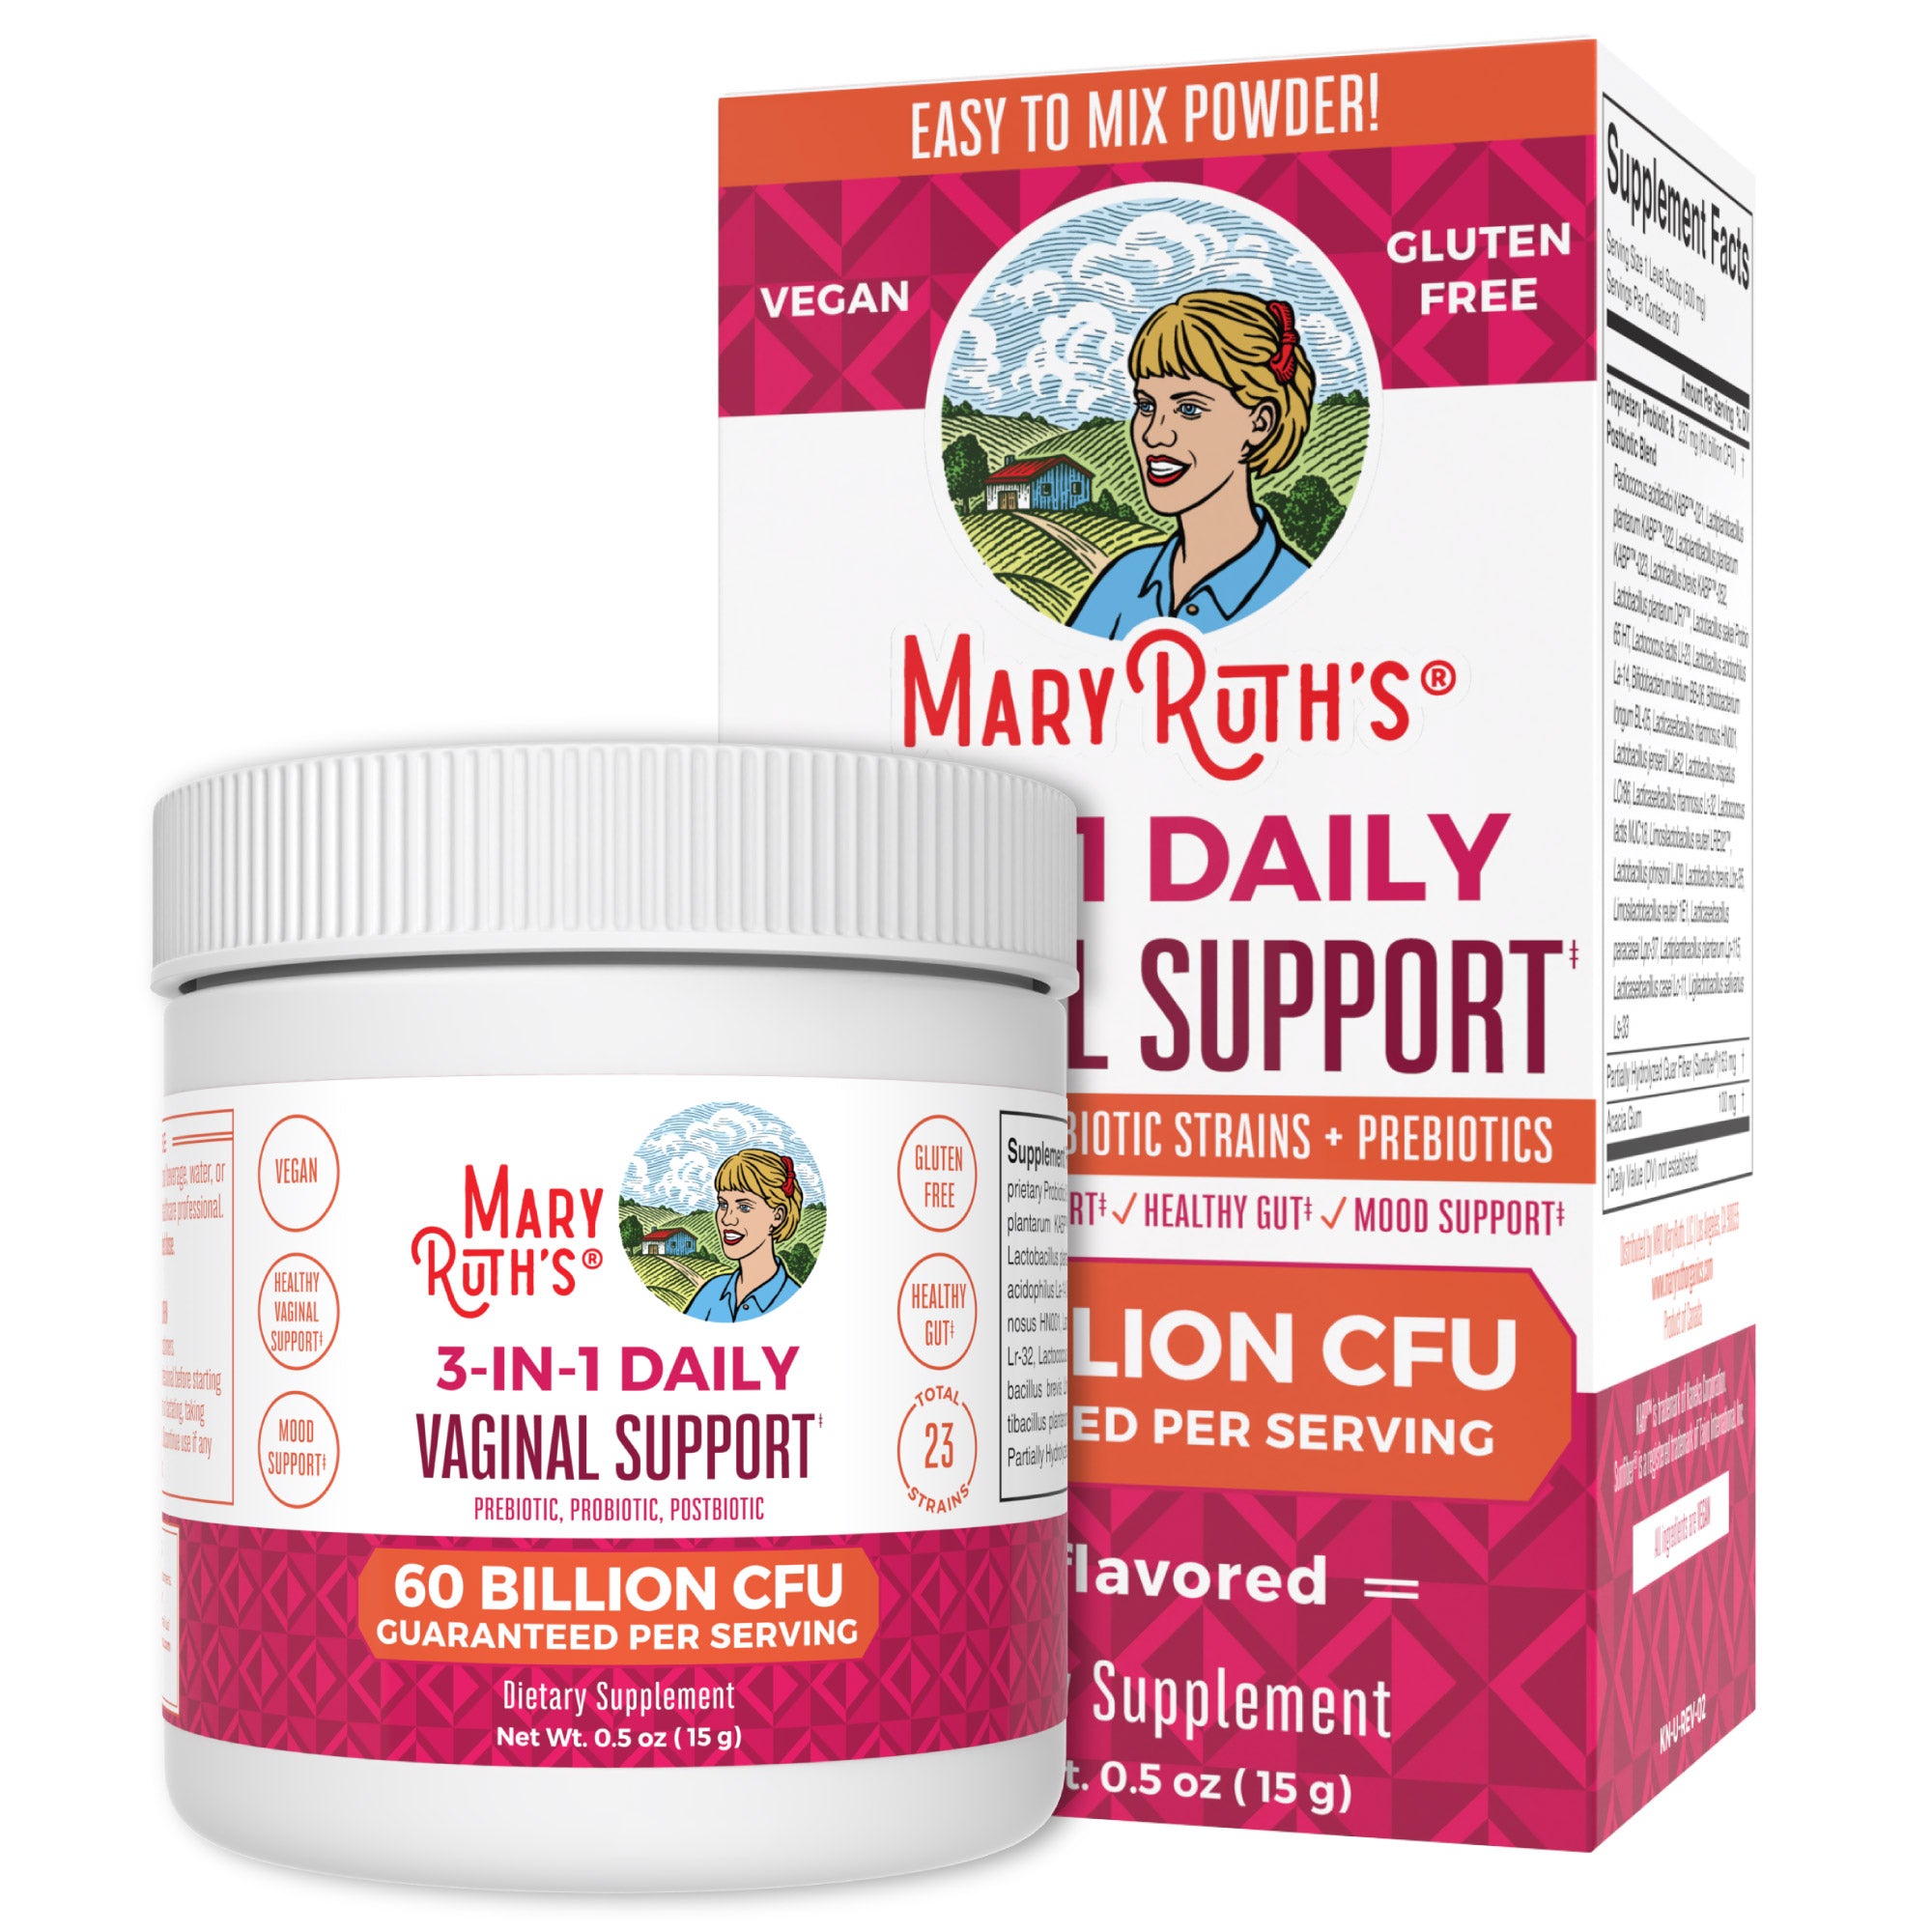 MaryRuth 3-in-1 Vaginal Health Support Powder with Probiotics Unflavored for healthy gut, mood, hormone balance, and immune function Product Image Bottle + Box